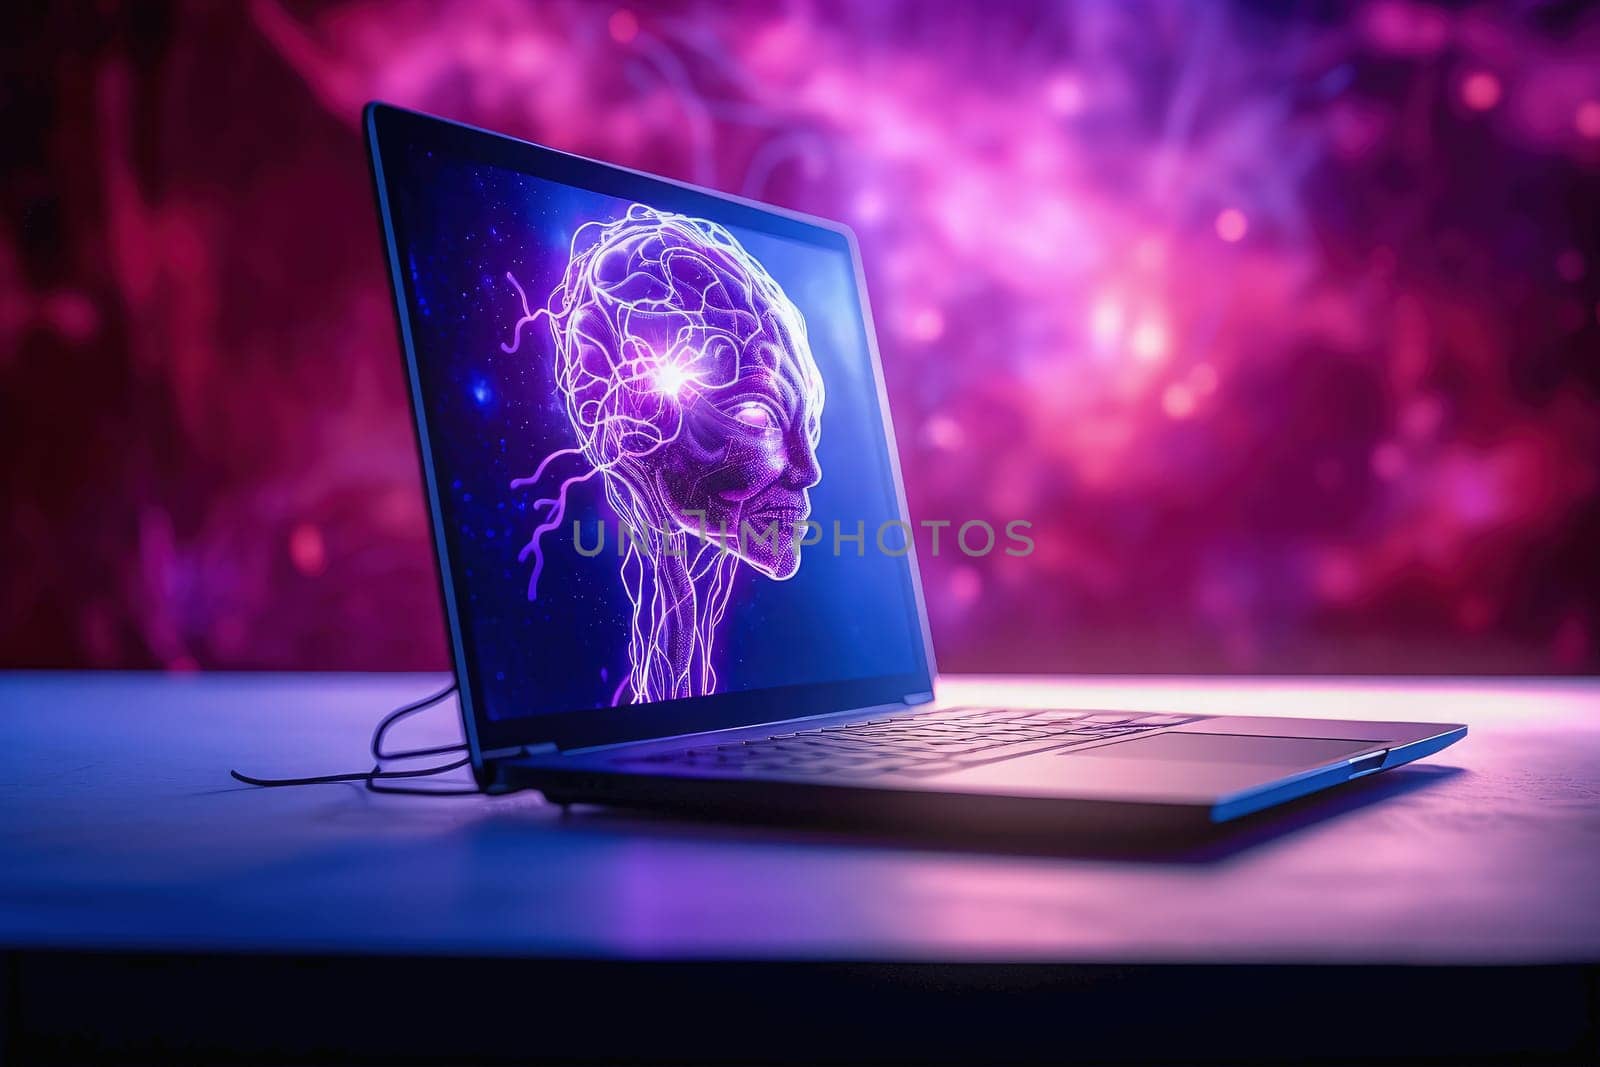 Man's head on a laptop screen in a purple neon room. The concept of artificial intelligence development. by Yurich32